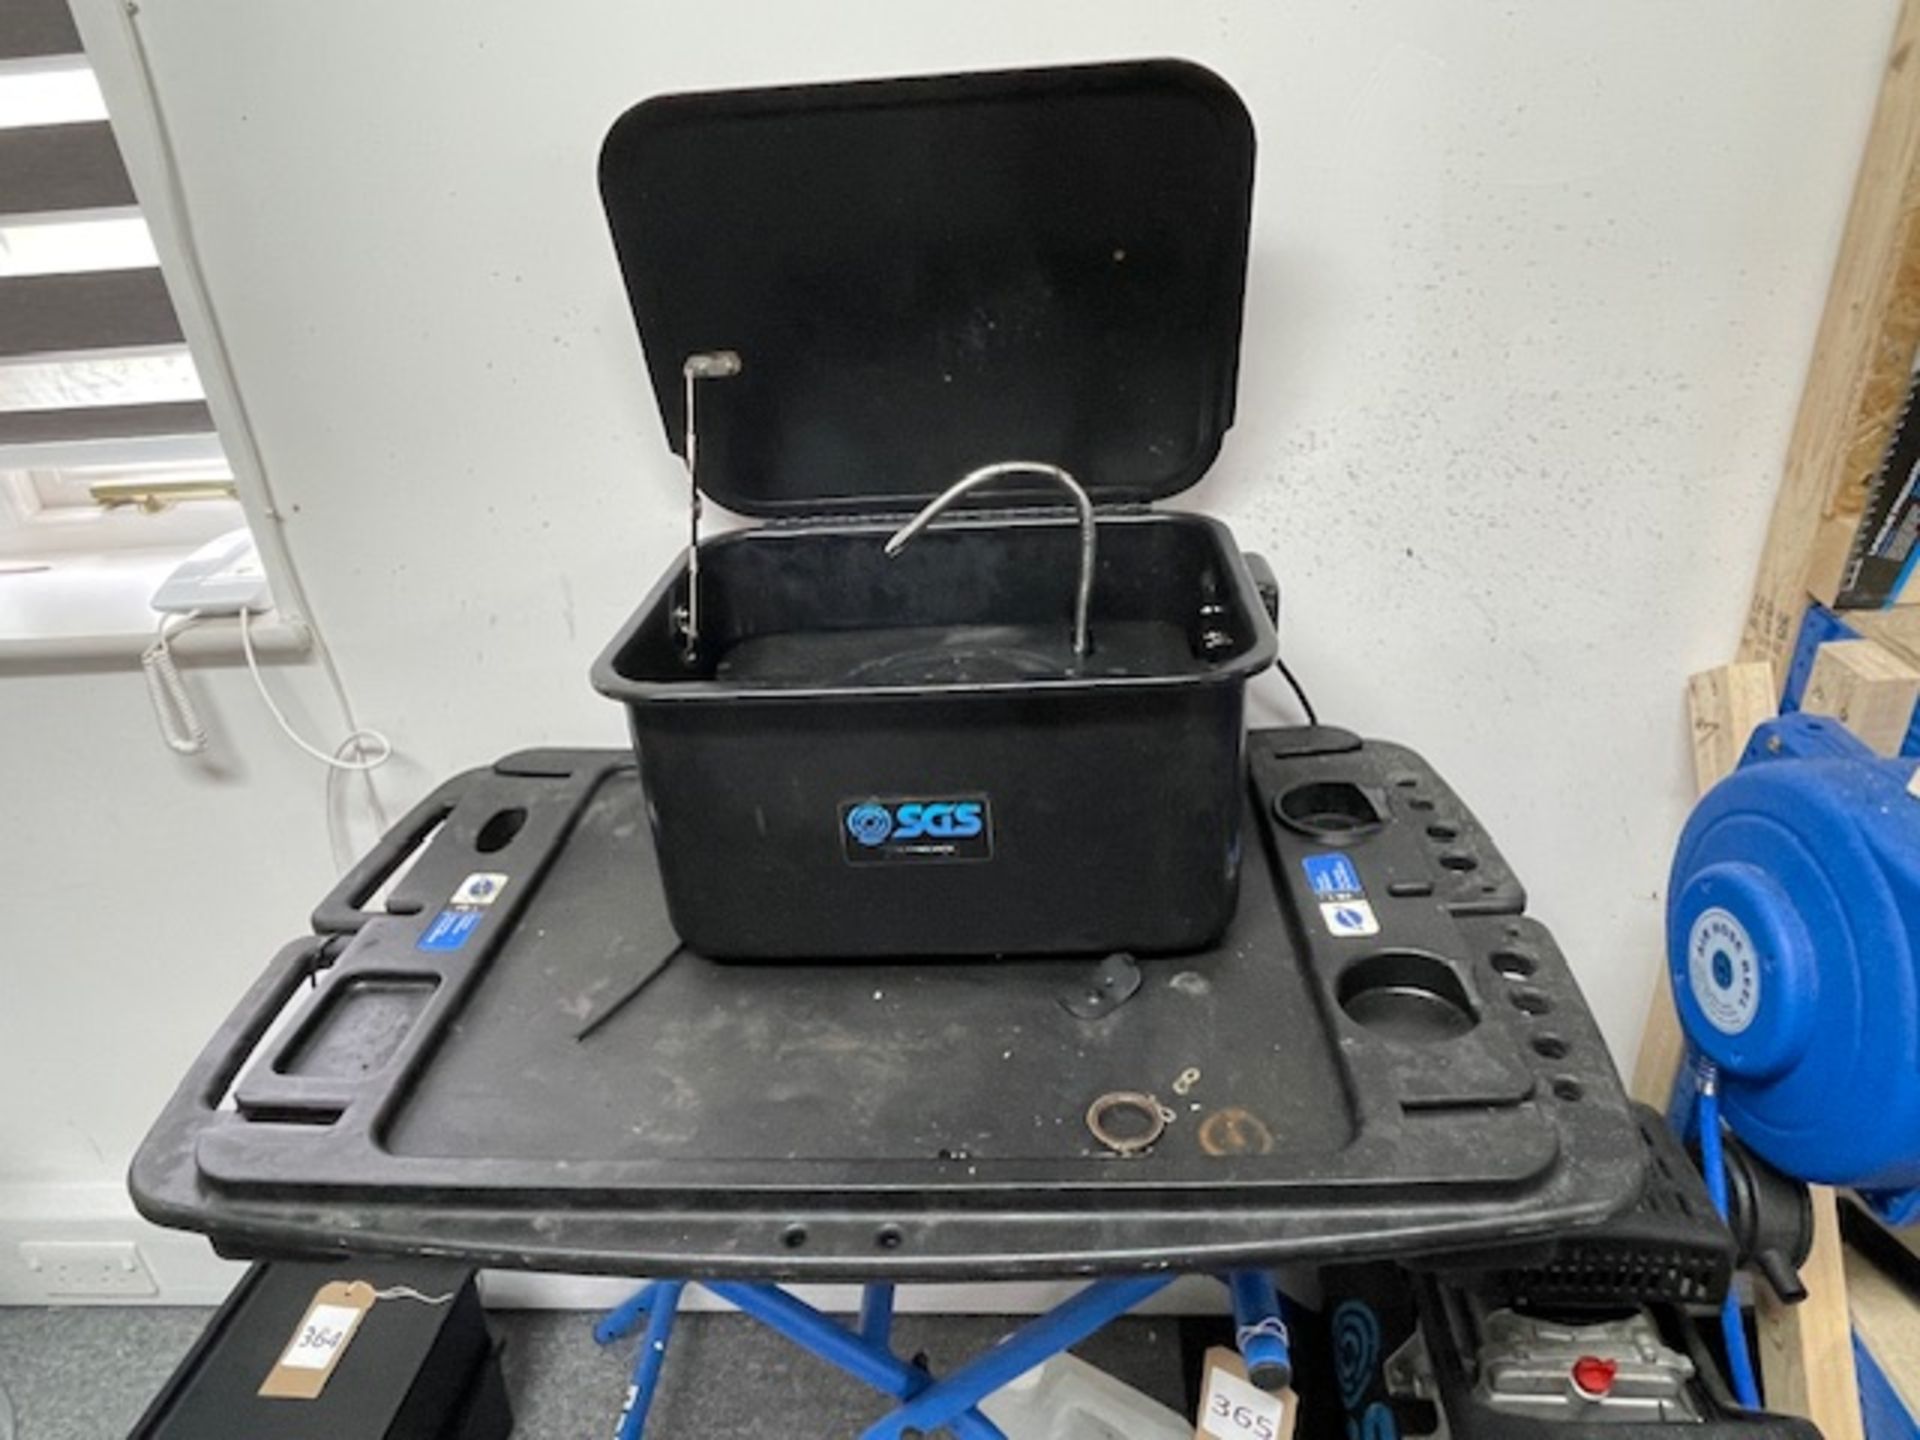 Park Tools Bench & SGS Cleaning Station (Location: Newport Pagnell. Please Refer to General Notes)